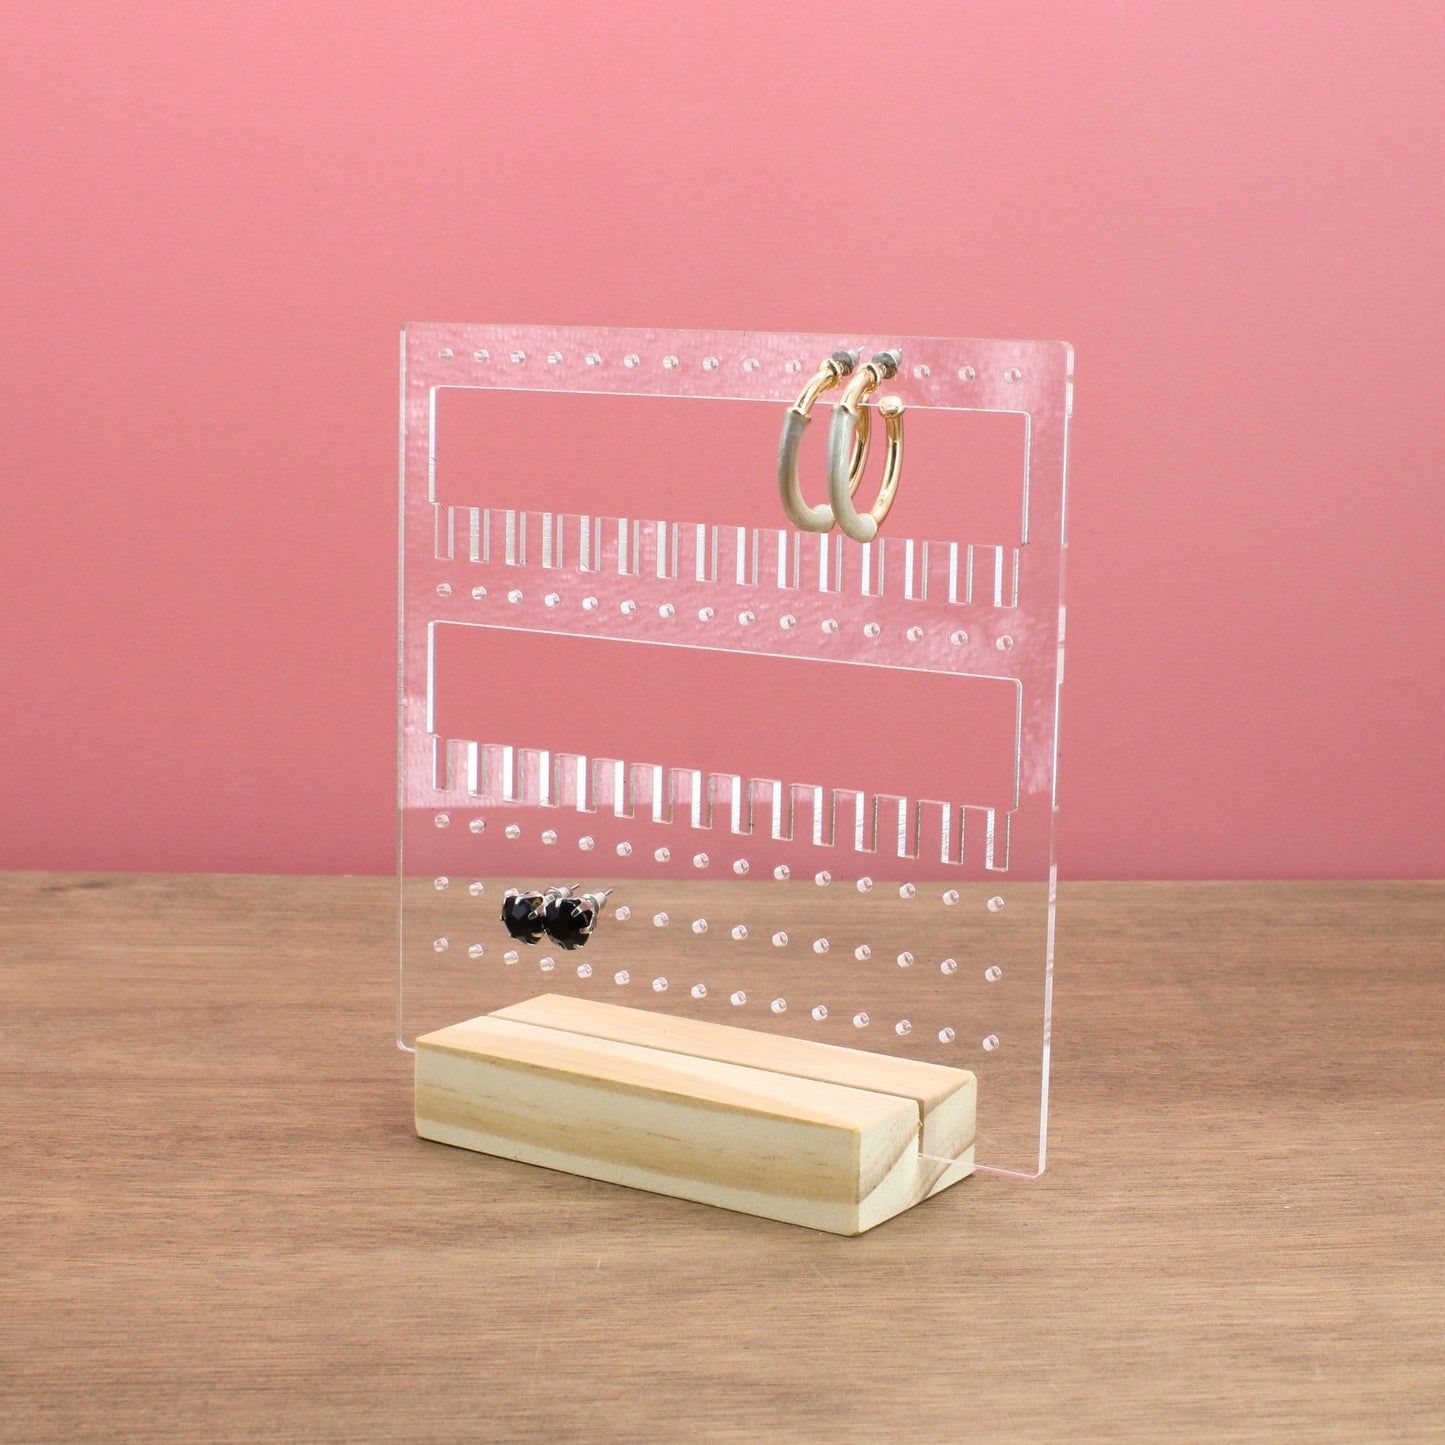 Earring Holder Stand - Clear Acrylic Stud Earrings Organiser - Jewellery Display | Gift for Her, Earring Holder, Earring Organizer